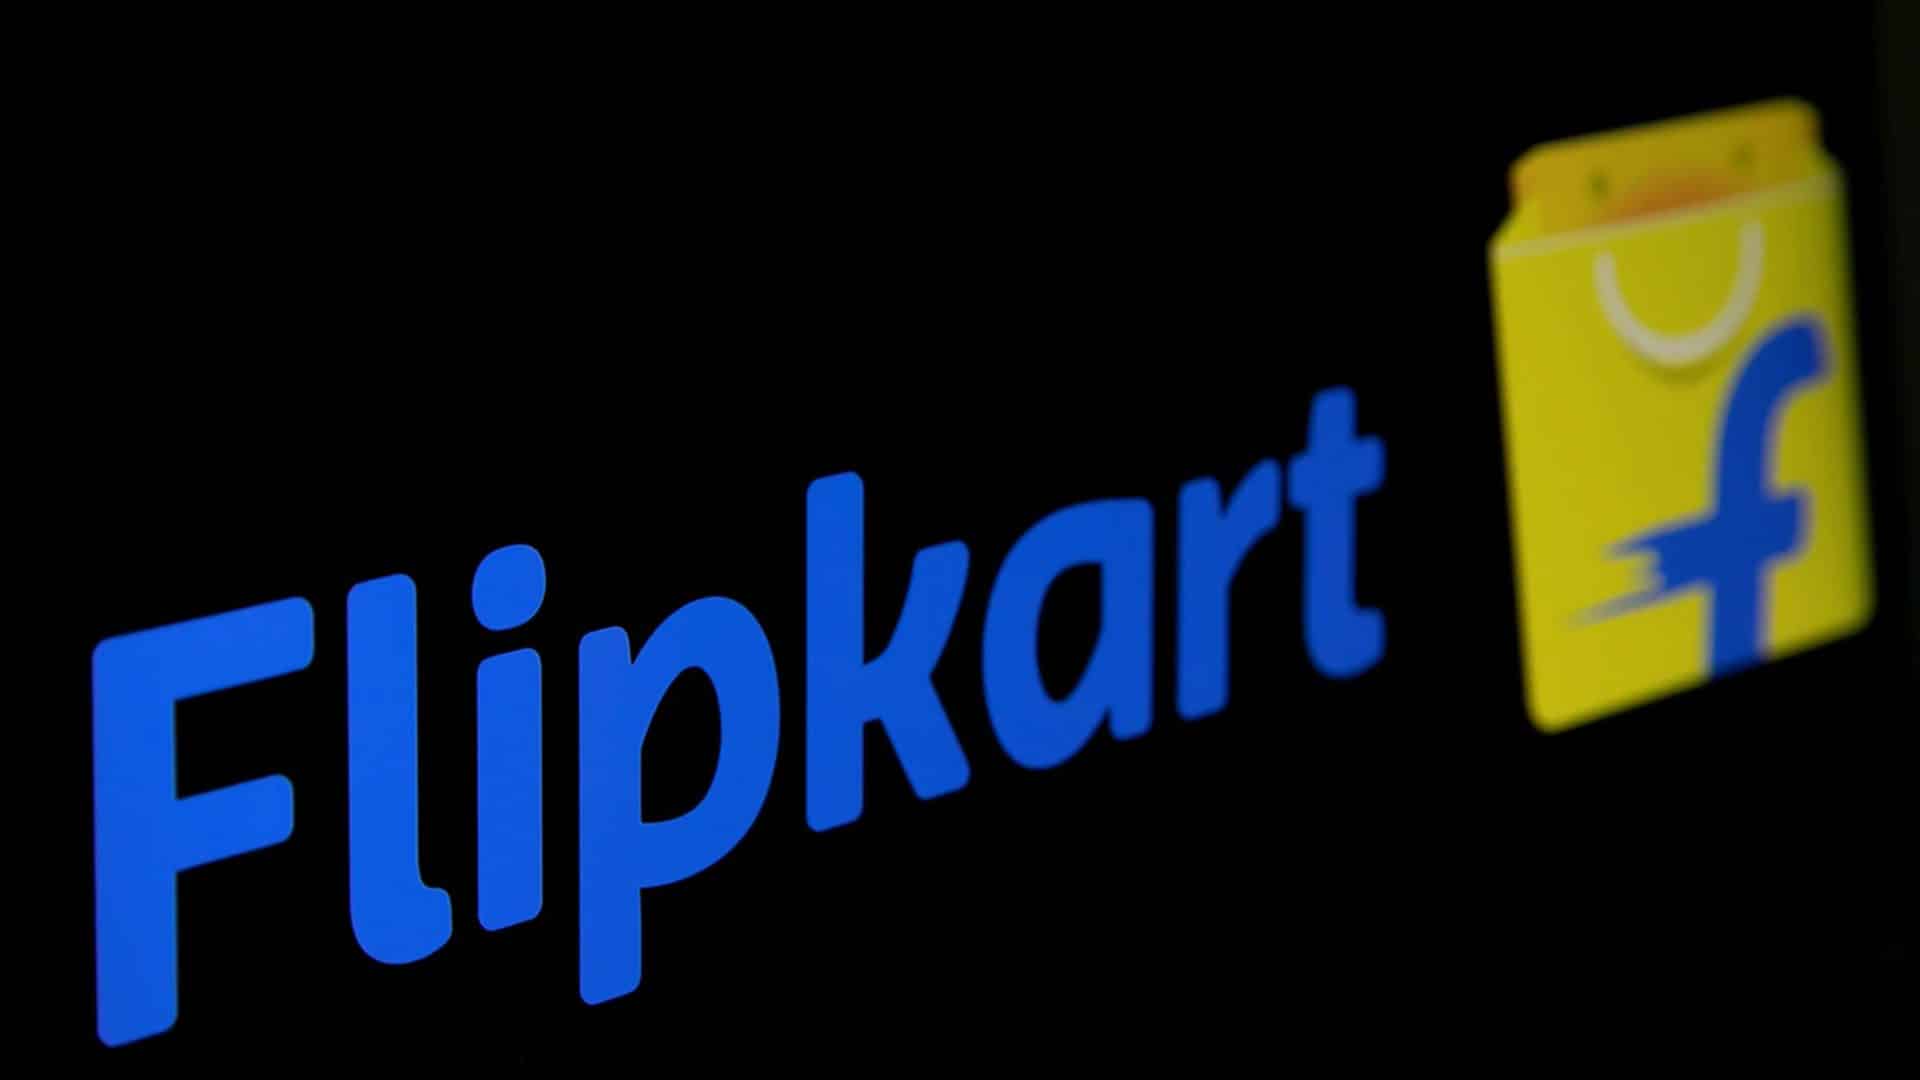 Walmart-owned Flipkart on Monday said it has partnered with HRX, which was co-founded by actor Hrithik Roshan, to launch a range of sports and fitness equipment for home workouts.